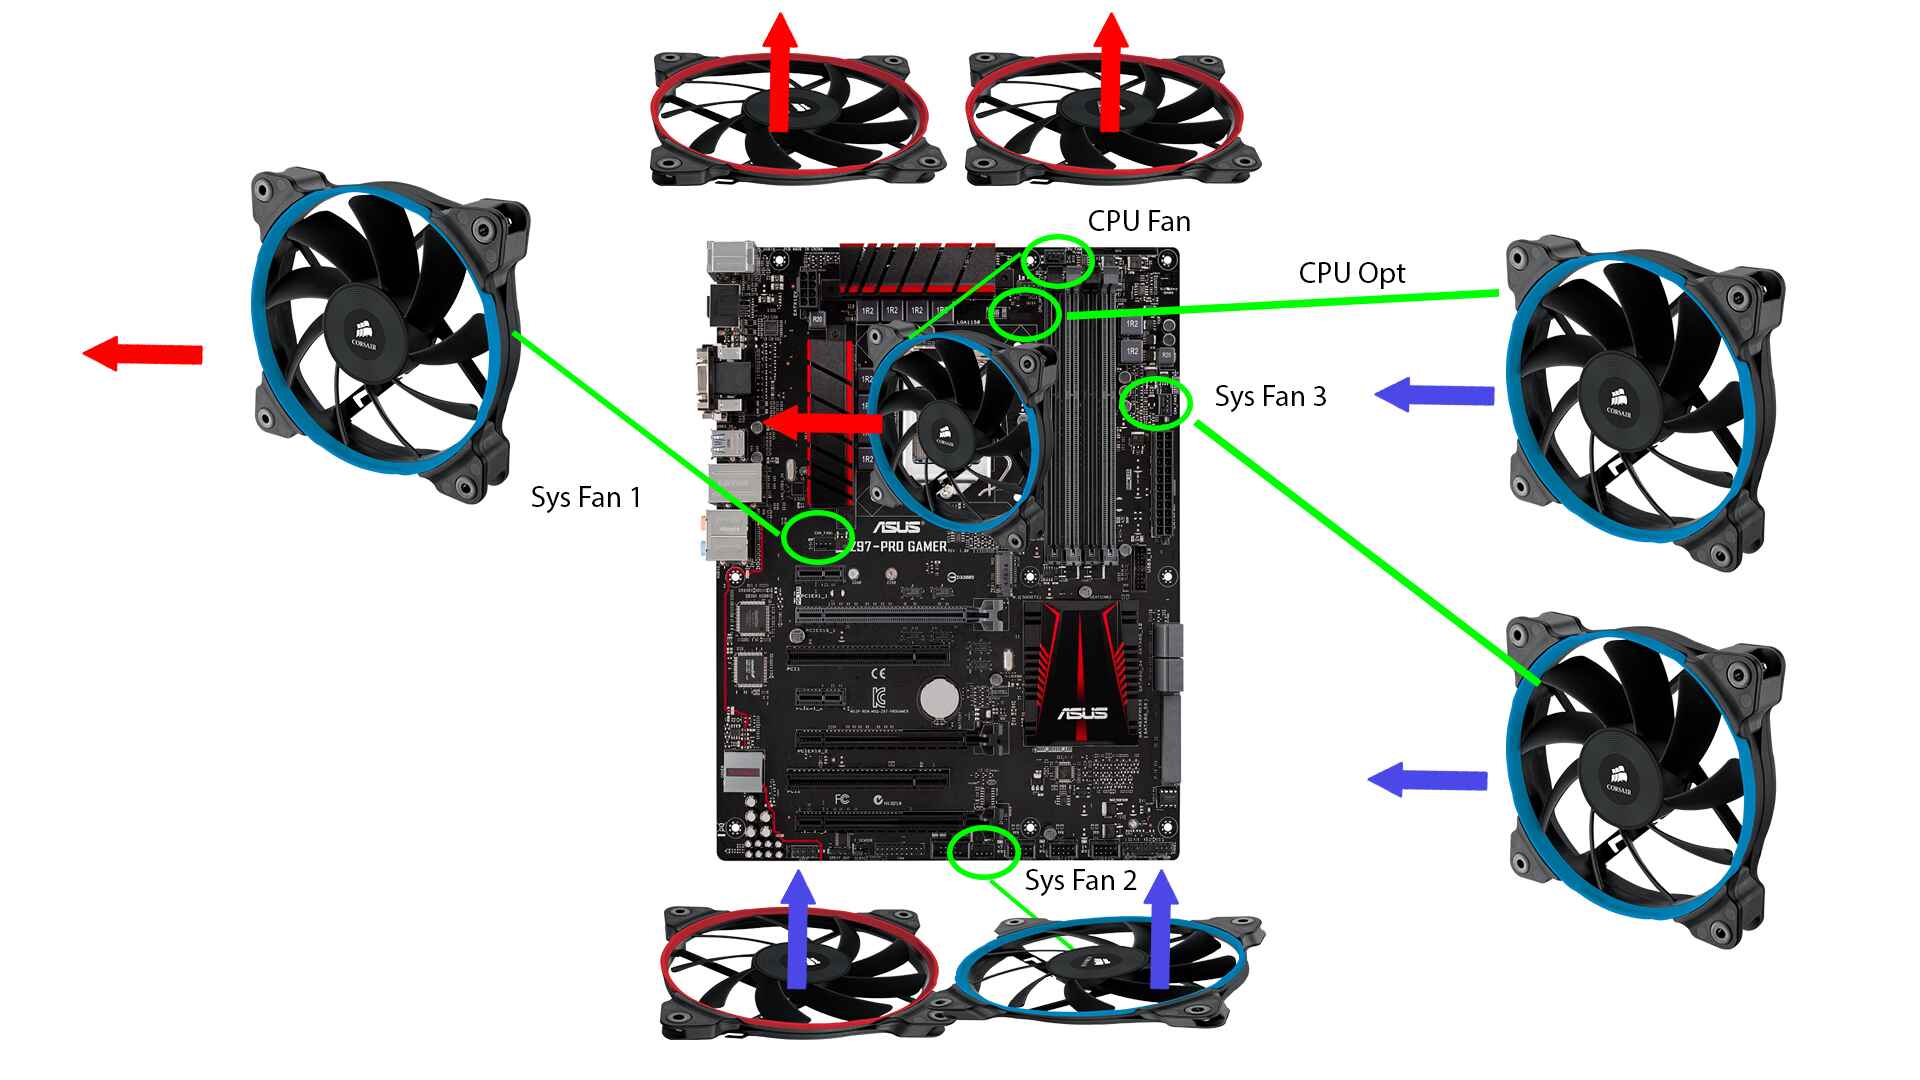 How To Know If Your PC Case Has More Fan Slots